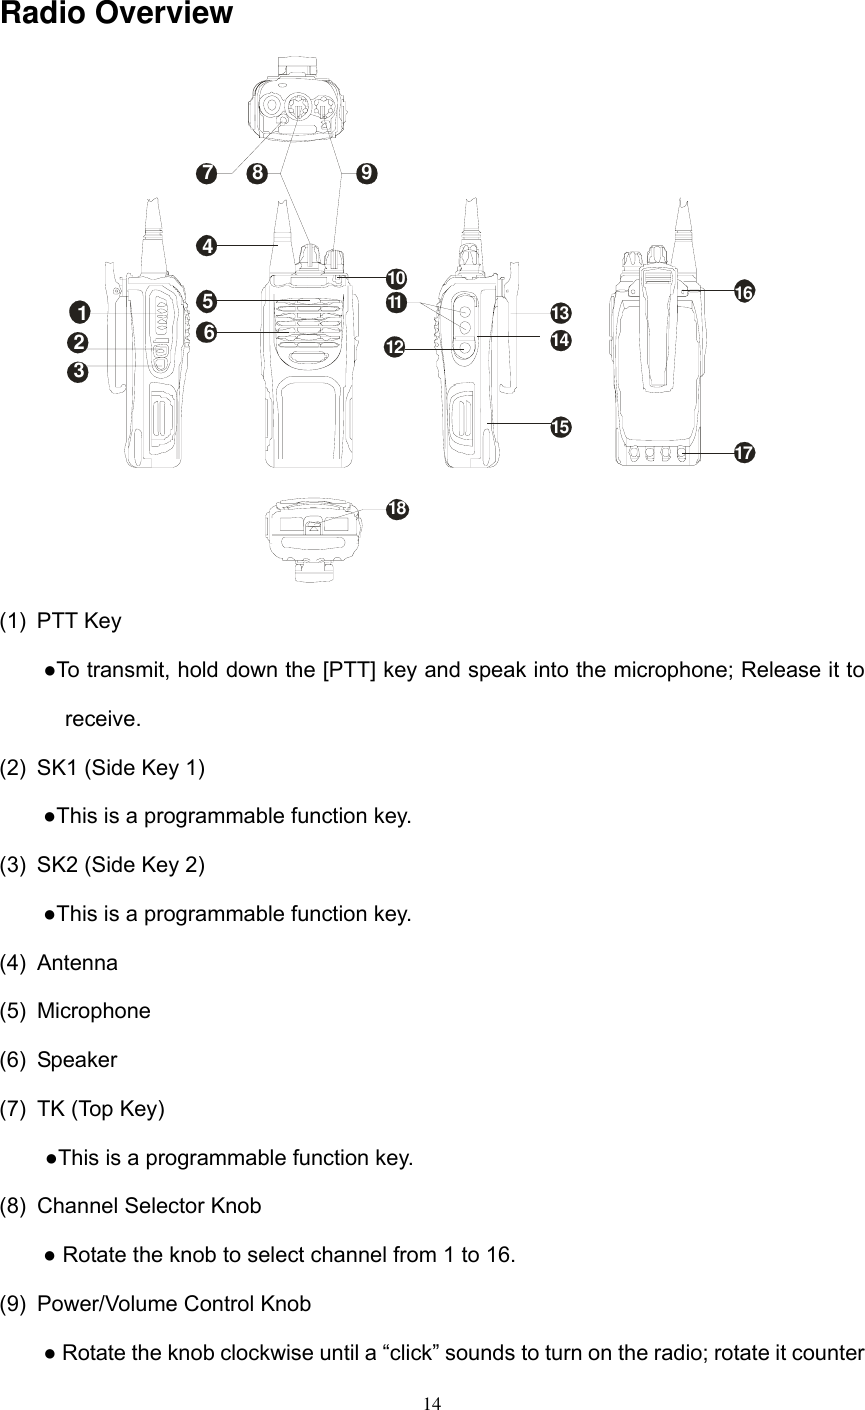  14 Radio Overview   1234567 8 910131411 161812171415 (1) PTT Key     ●To transmit, hold down the [PTT] key and speak into the microphone; Release it to receive. (2)  SK1 (Side Key 1) ●This is a programmable function key. (3)  SK2 (Side Key 2) ●This is a programmable function key. (4) Antenna (5) Microphone (6) Speaker (7)  TK (Top Key) ●This is a programmable function key. (8)  Channel Selector Knob ● Rotate the knob to select channel from 1 to 16. (9)  Power/Volume Control Knob     ● Rotate the knob clockwise until a “click” sounds to turn on the radio; rotate it counter 